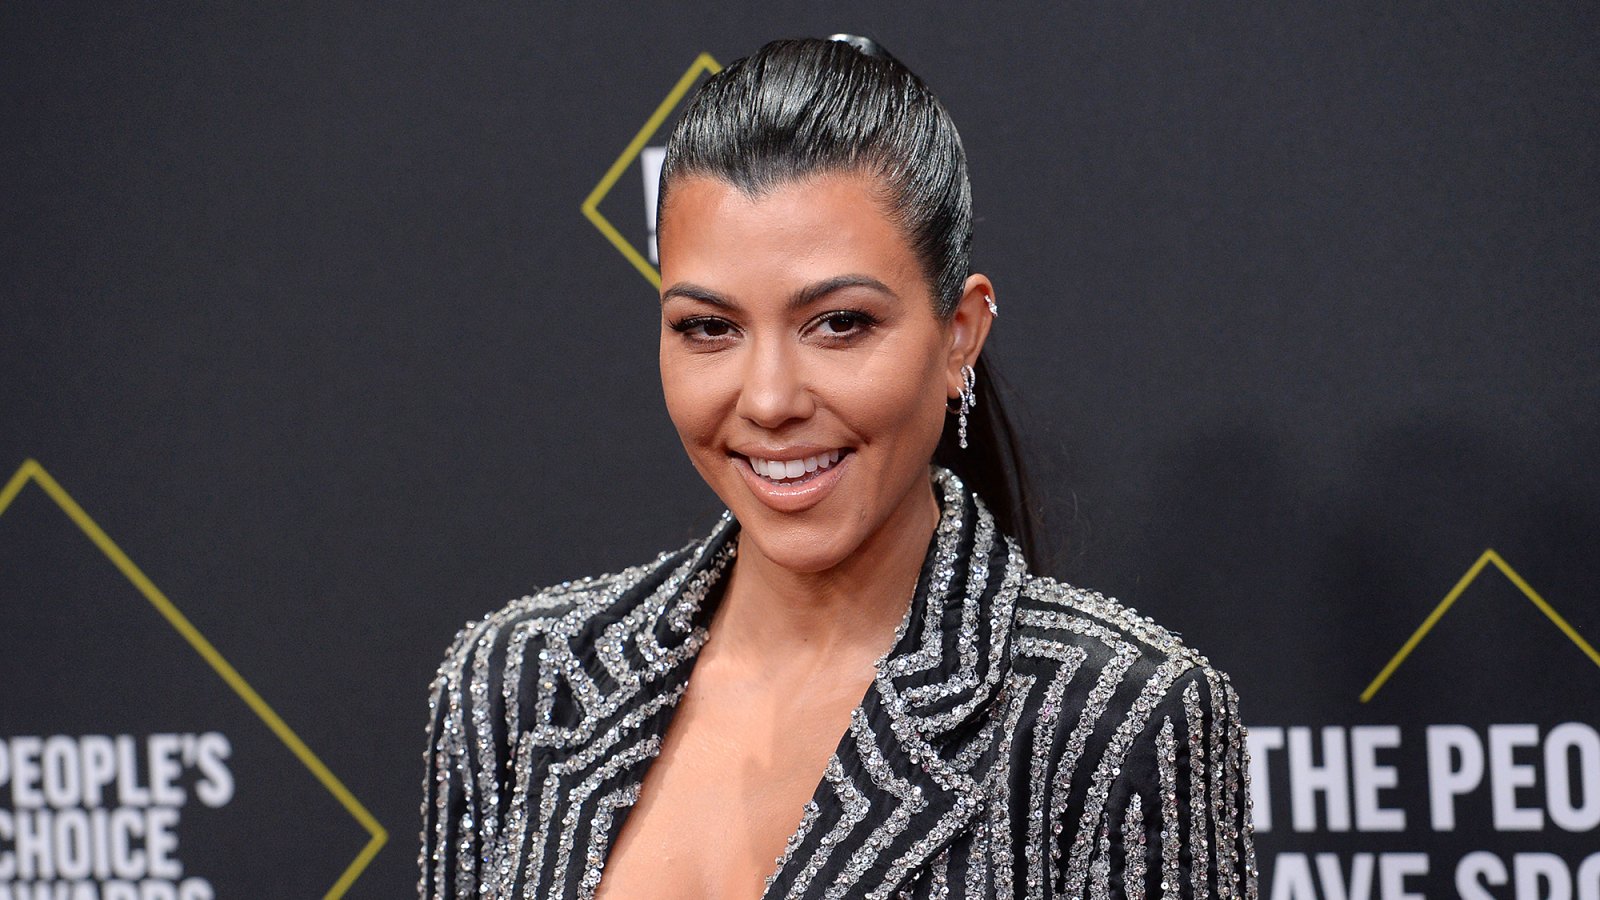 Kourtney Kardashian Says Her Energy Is 'Finally Back' 1 Year After Last IVF Cycle